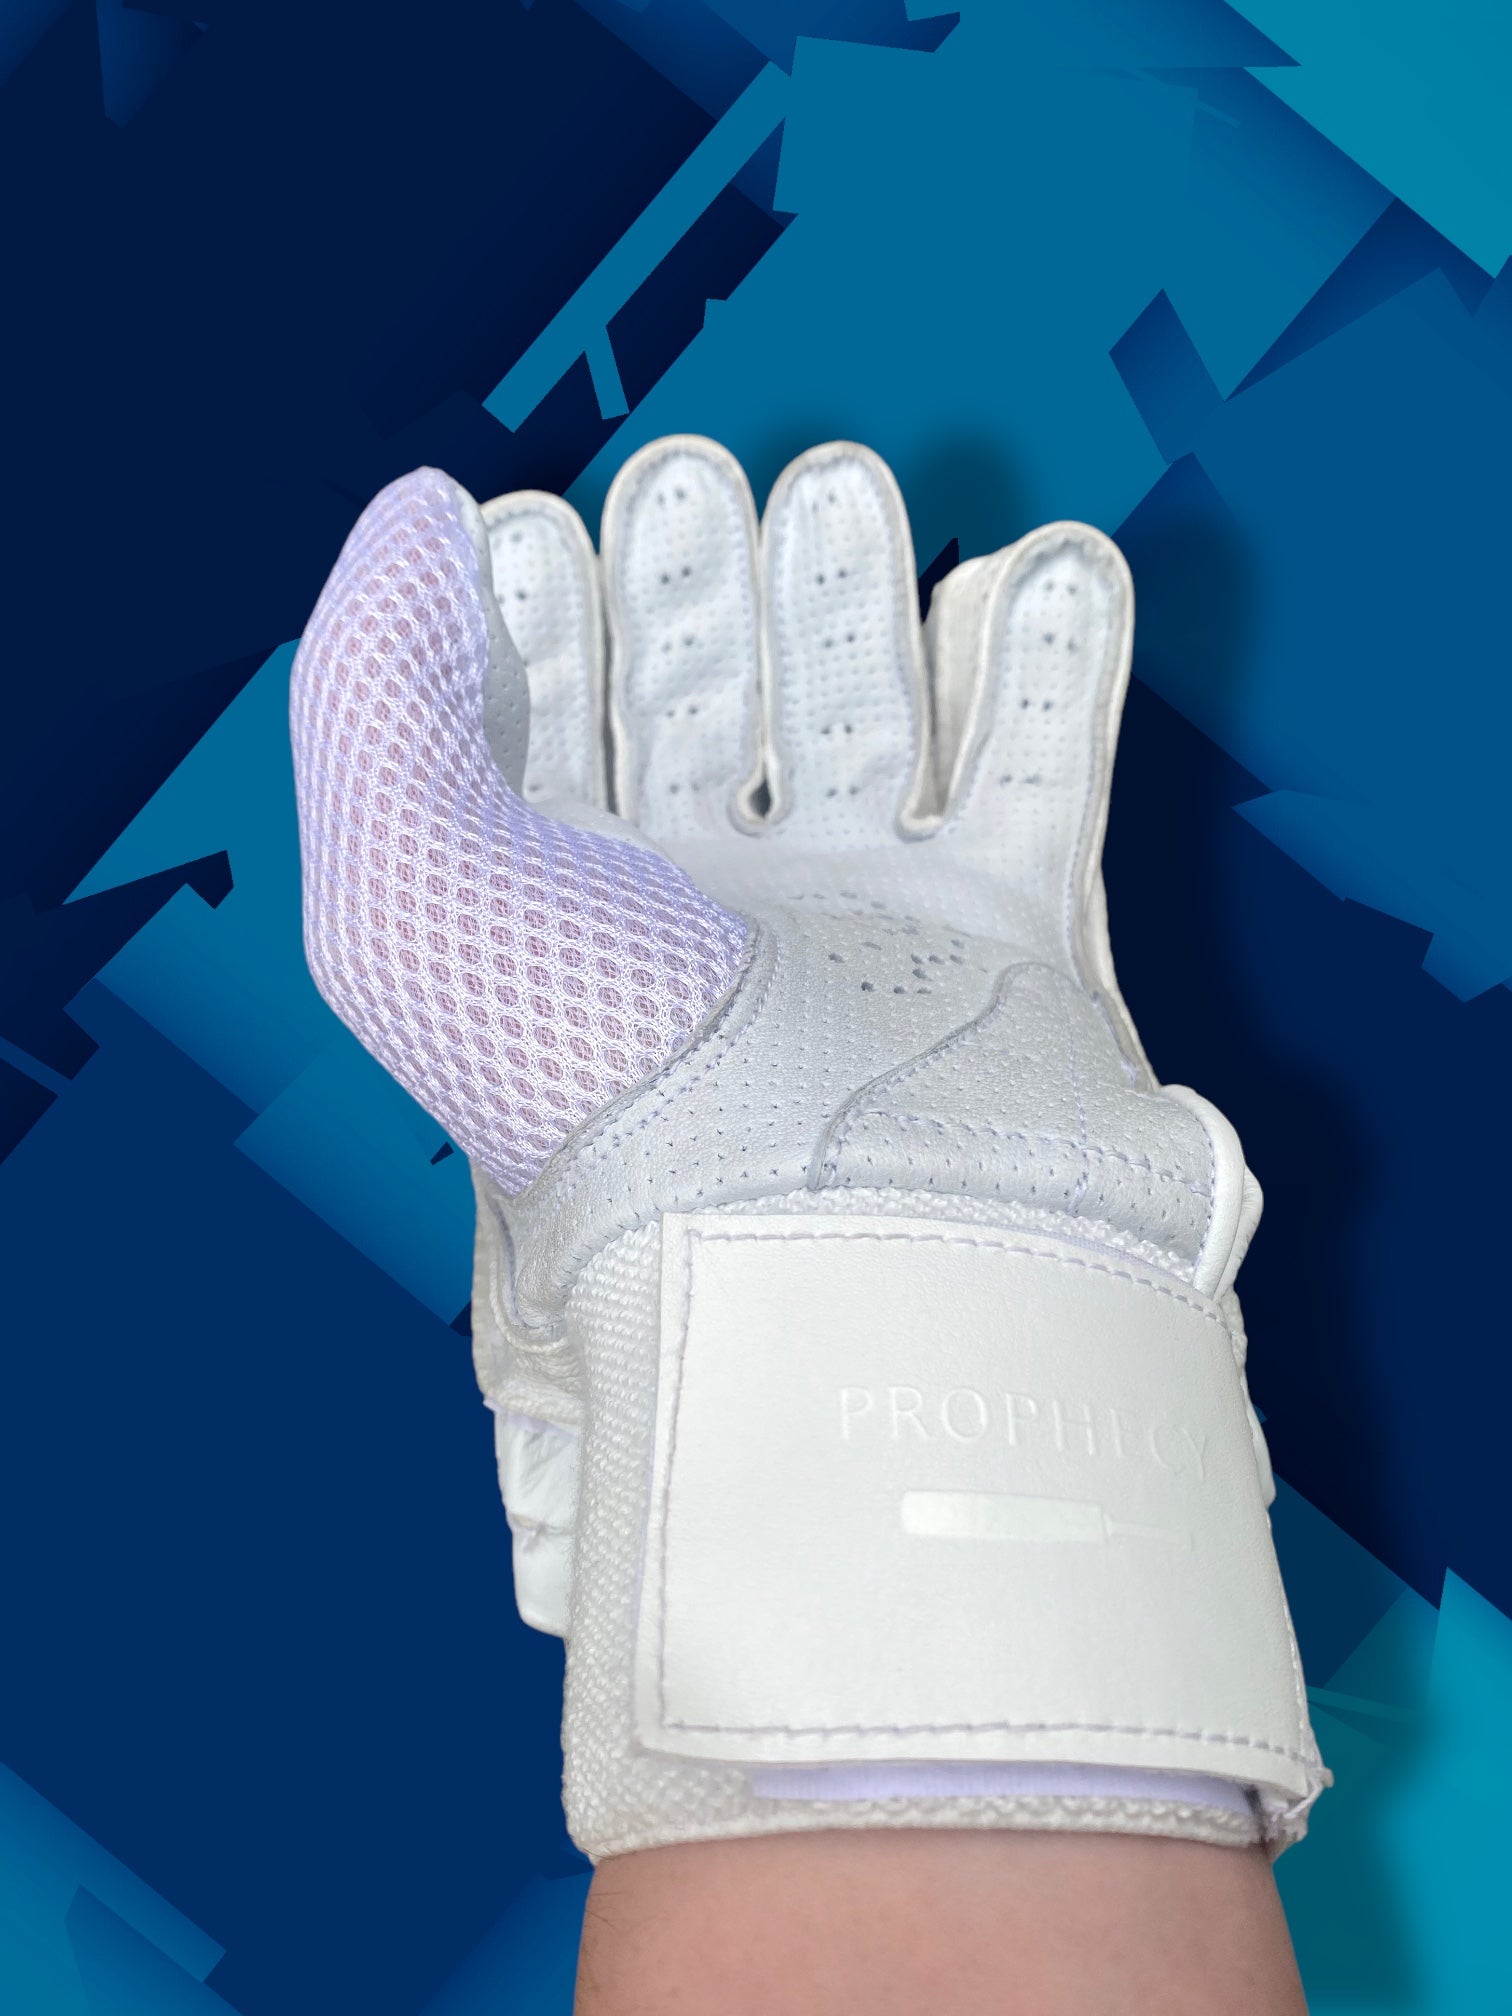 Prophecy Cricket Gloves